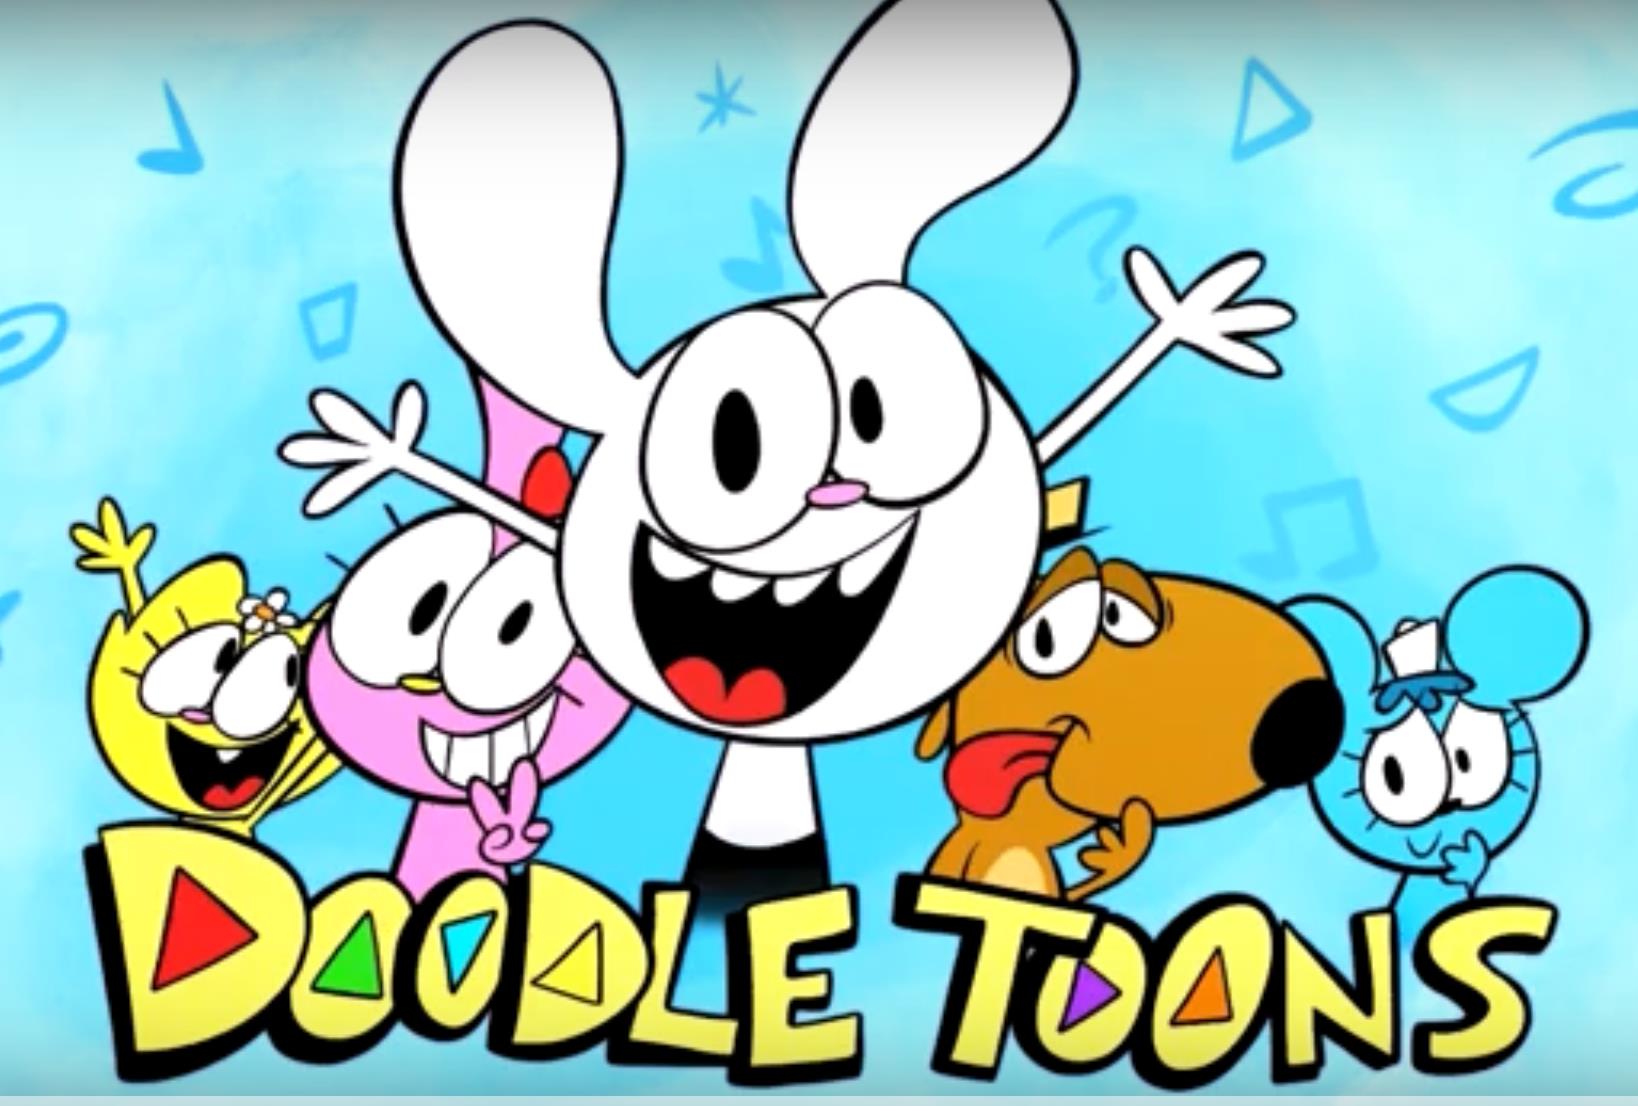 Toons Before you